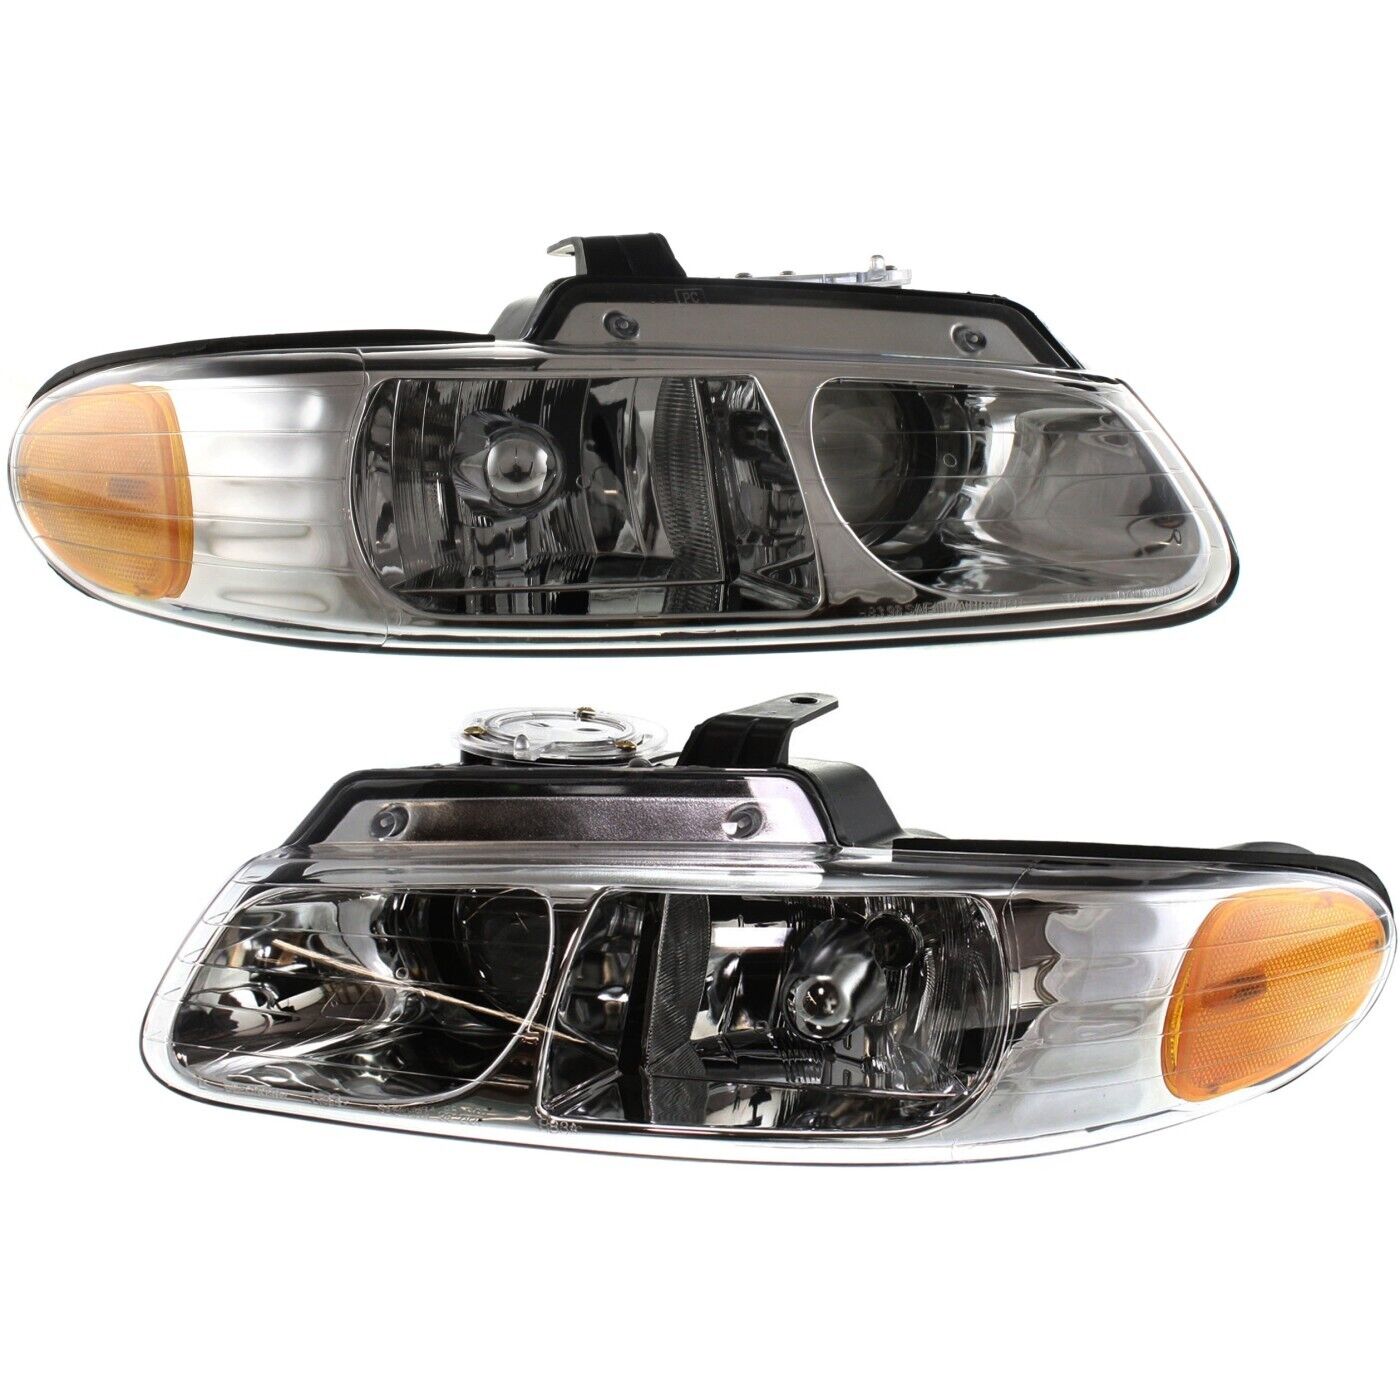 Headlight Set For 2000 Chrysler Voyager Left & Right w/ 2-Prong Connector 2Pc